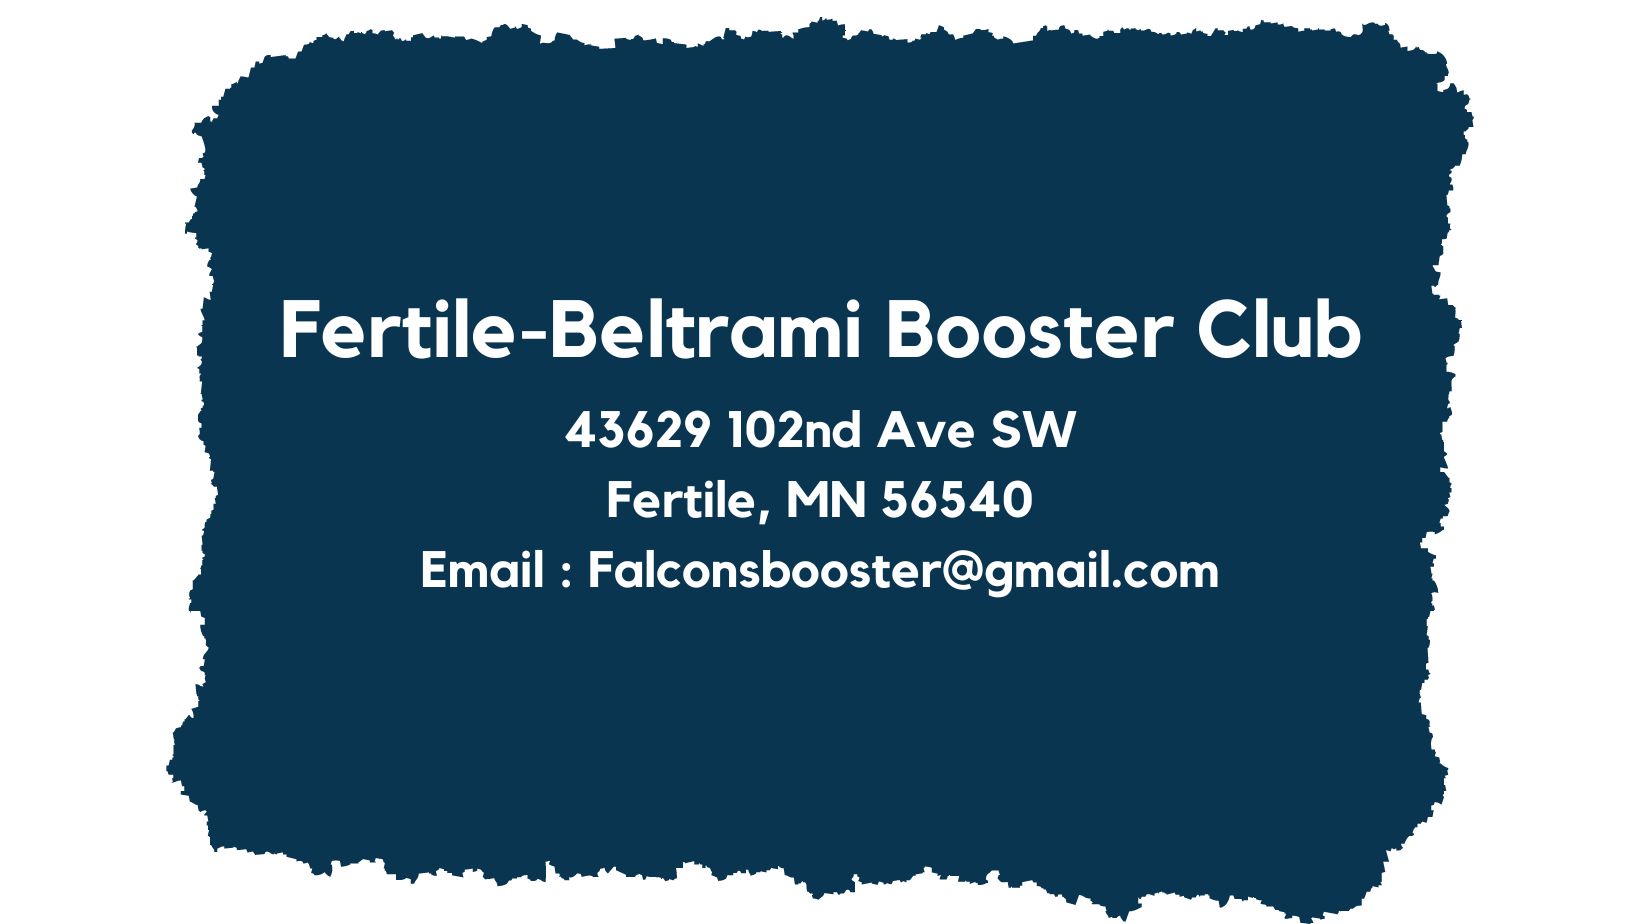 Address and email for Fertile-Beltrami Booster Club is 43629 102nd Ave SW, Fertile, MN 56540, Email : FBbooster@gmail.com